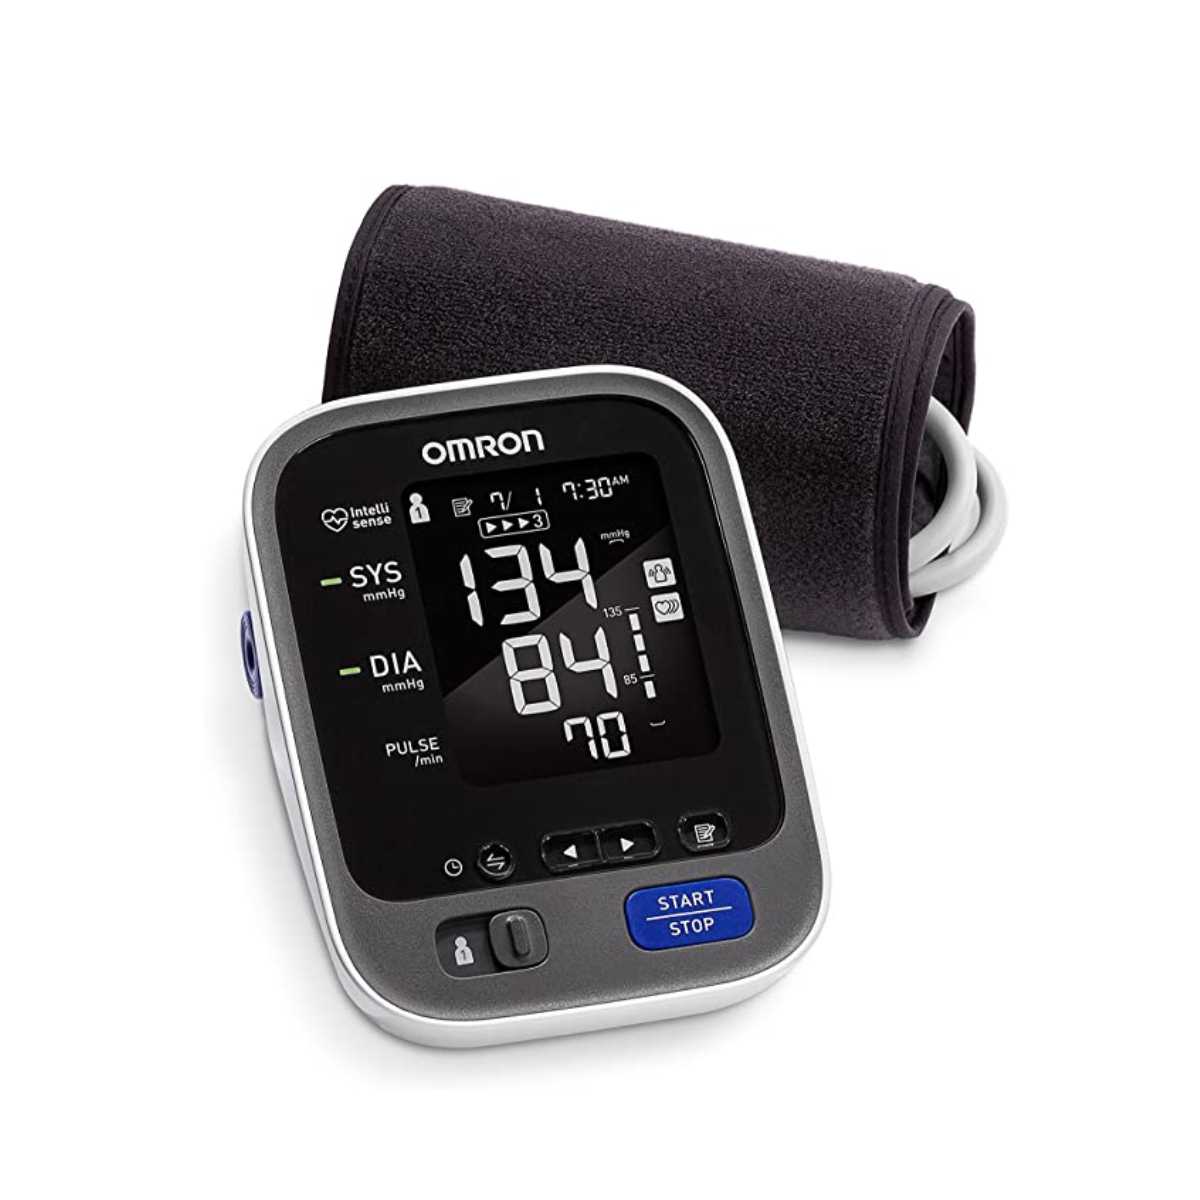 Automatic blood pressure monitor - Travel check - Pic Solution - wrist